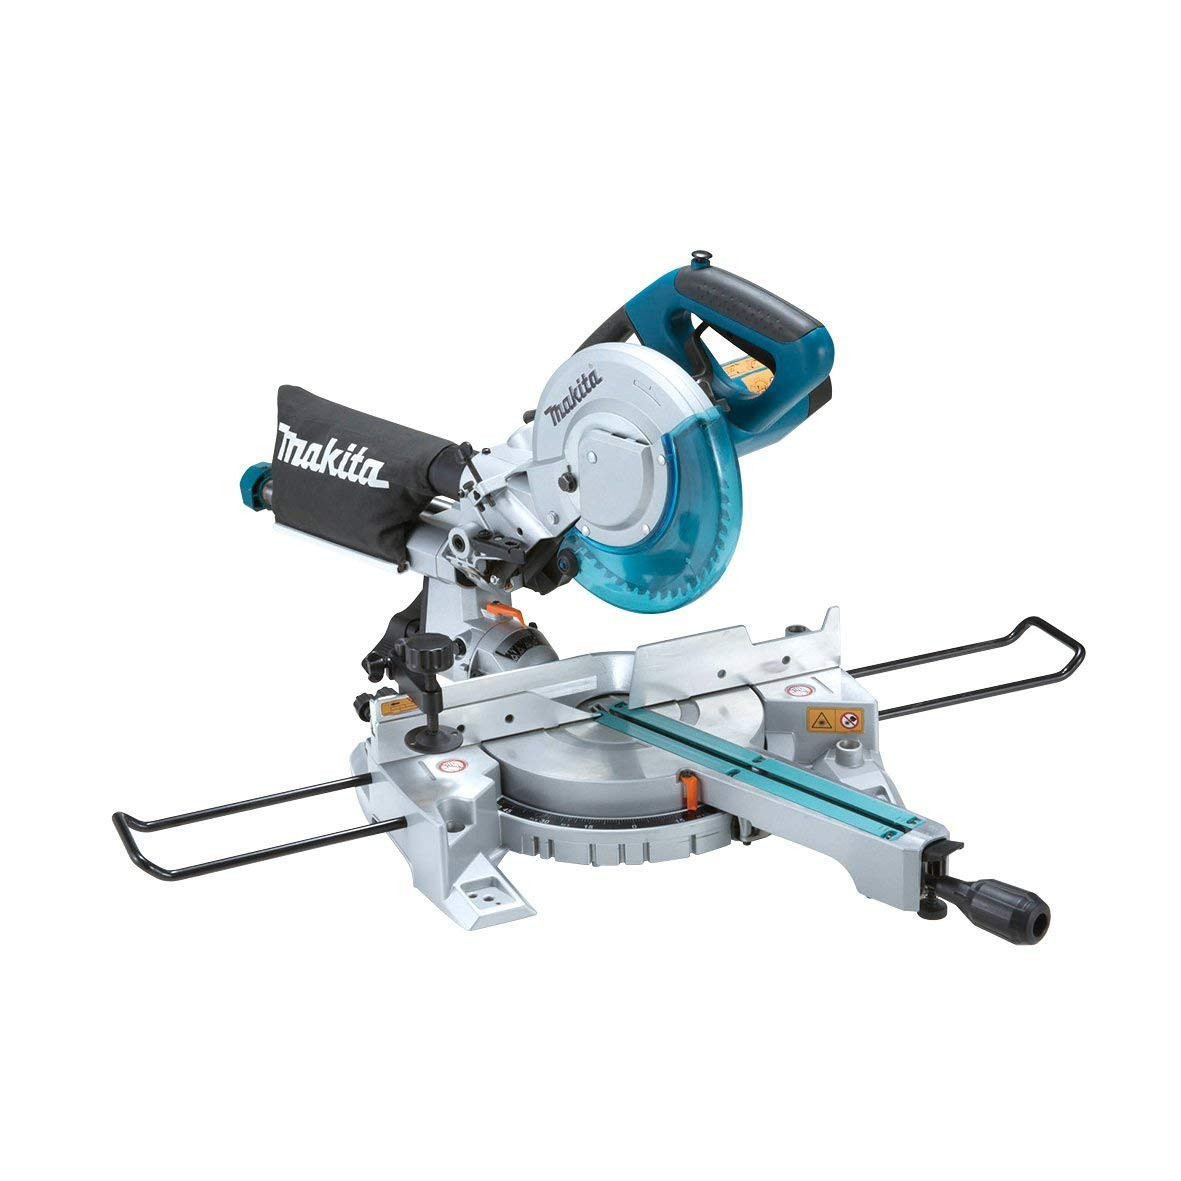 16 attractive Discount Hardwood Flooring 1416 Channing 2024 free download discount hardwood flooring 1416 channing of makita ls0815f 8 1 2 slide compound miter saw amazon com with 61n6x5yzzhl sl1181